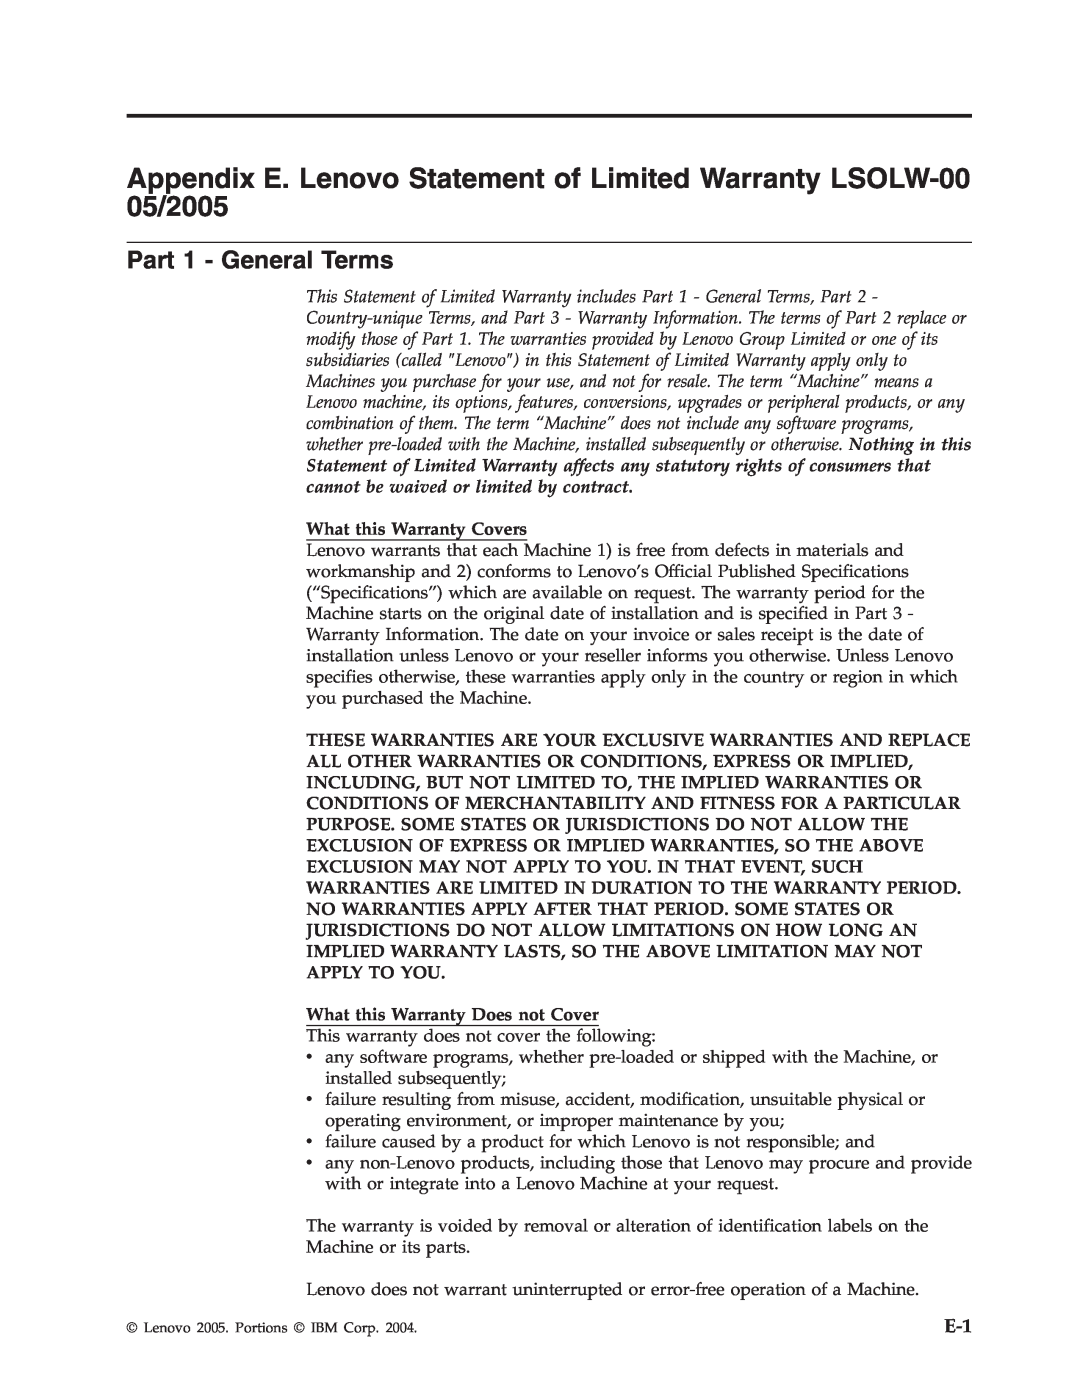 Lenovo C400 manual Part 1 - General Terms, What this Warranty Covers, What this Warranty Does not Cover 